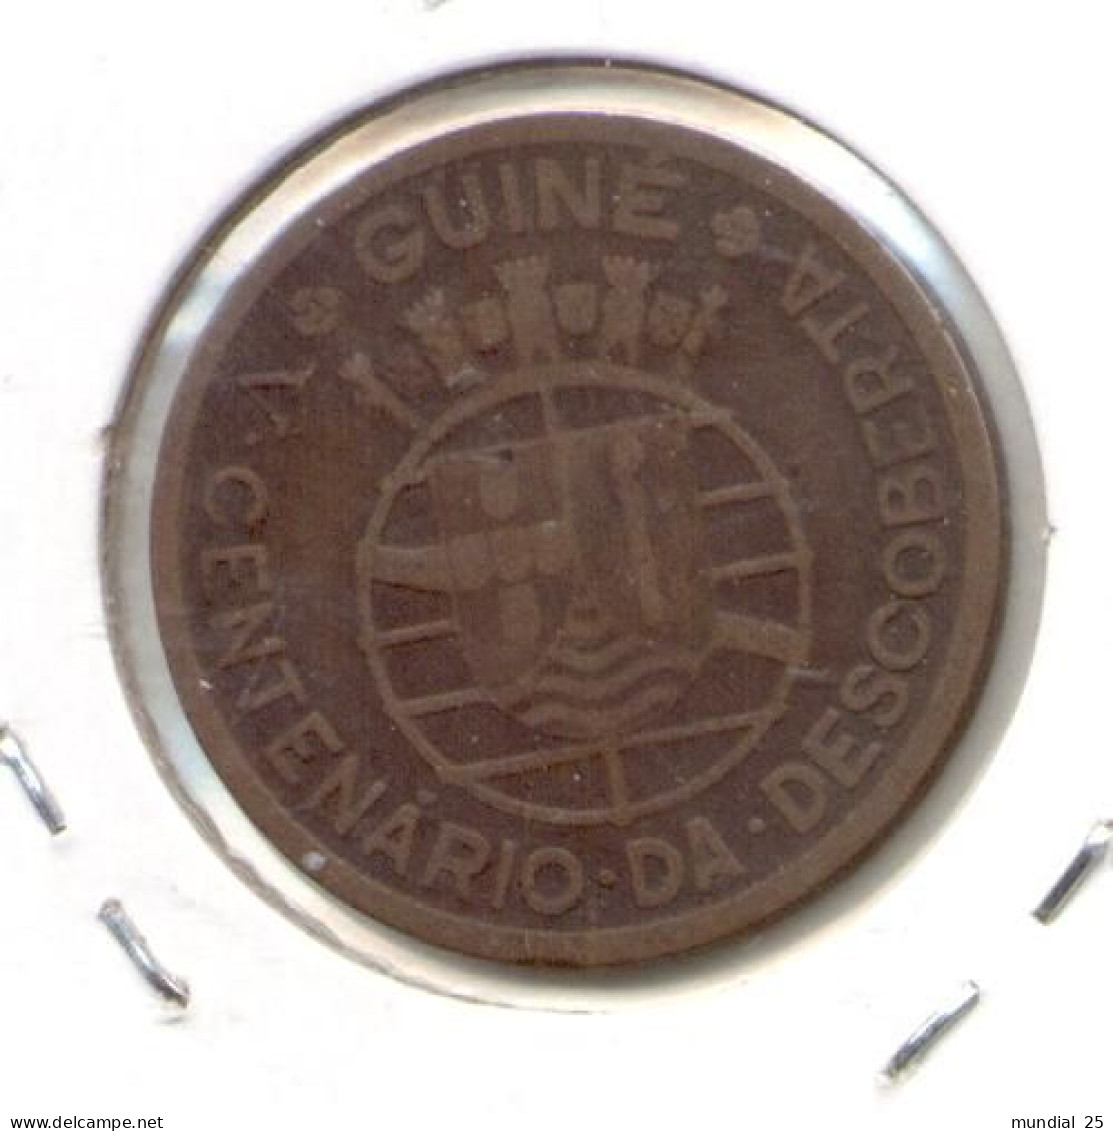 GUINEA-BISSAU PORTUGAL 50 CENTAVOS N/D (1946) - 500th ANNIVERSARY OF DISCOVERY - Guinea Bissau